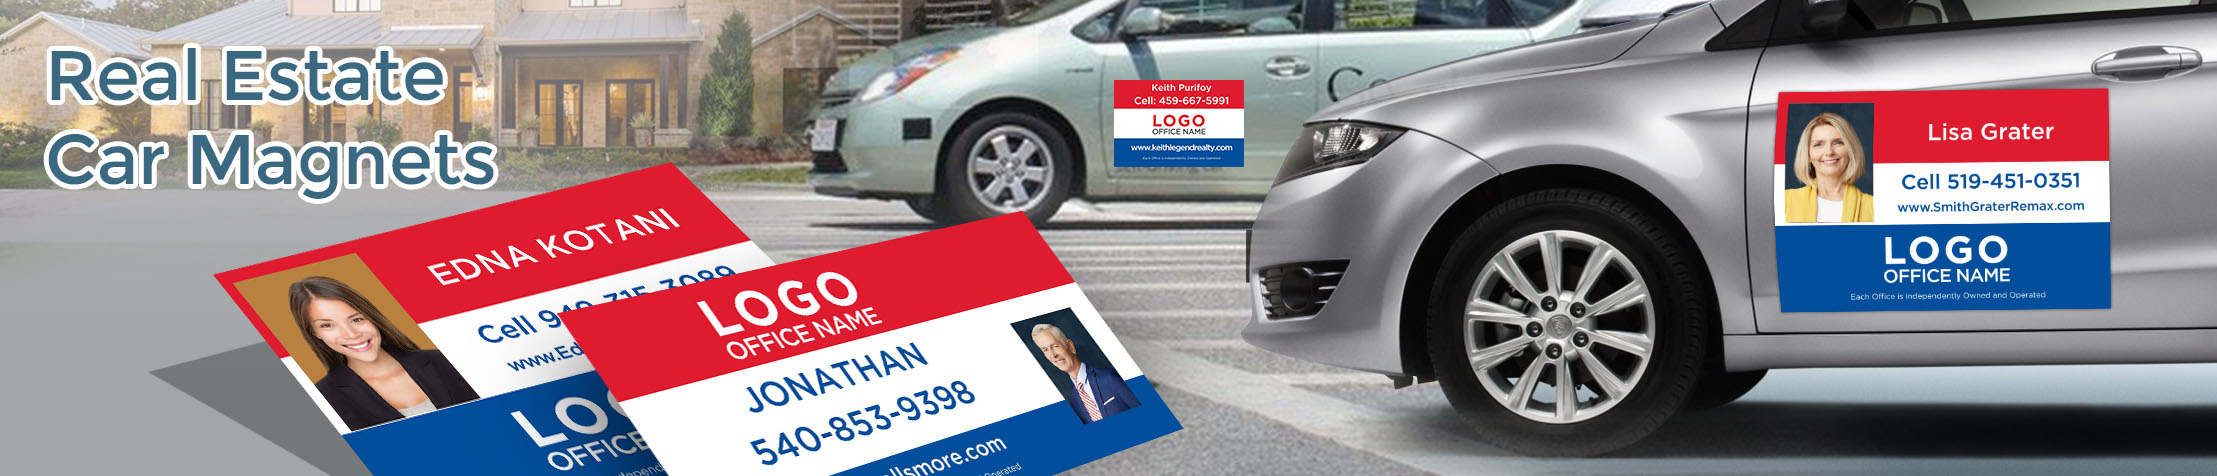 RE/MAX Real Estate Car Magnets - RE/MAX  custom car magnets for realtors, with or without photo | BestPrintBuy.com